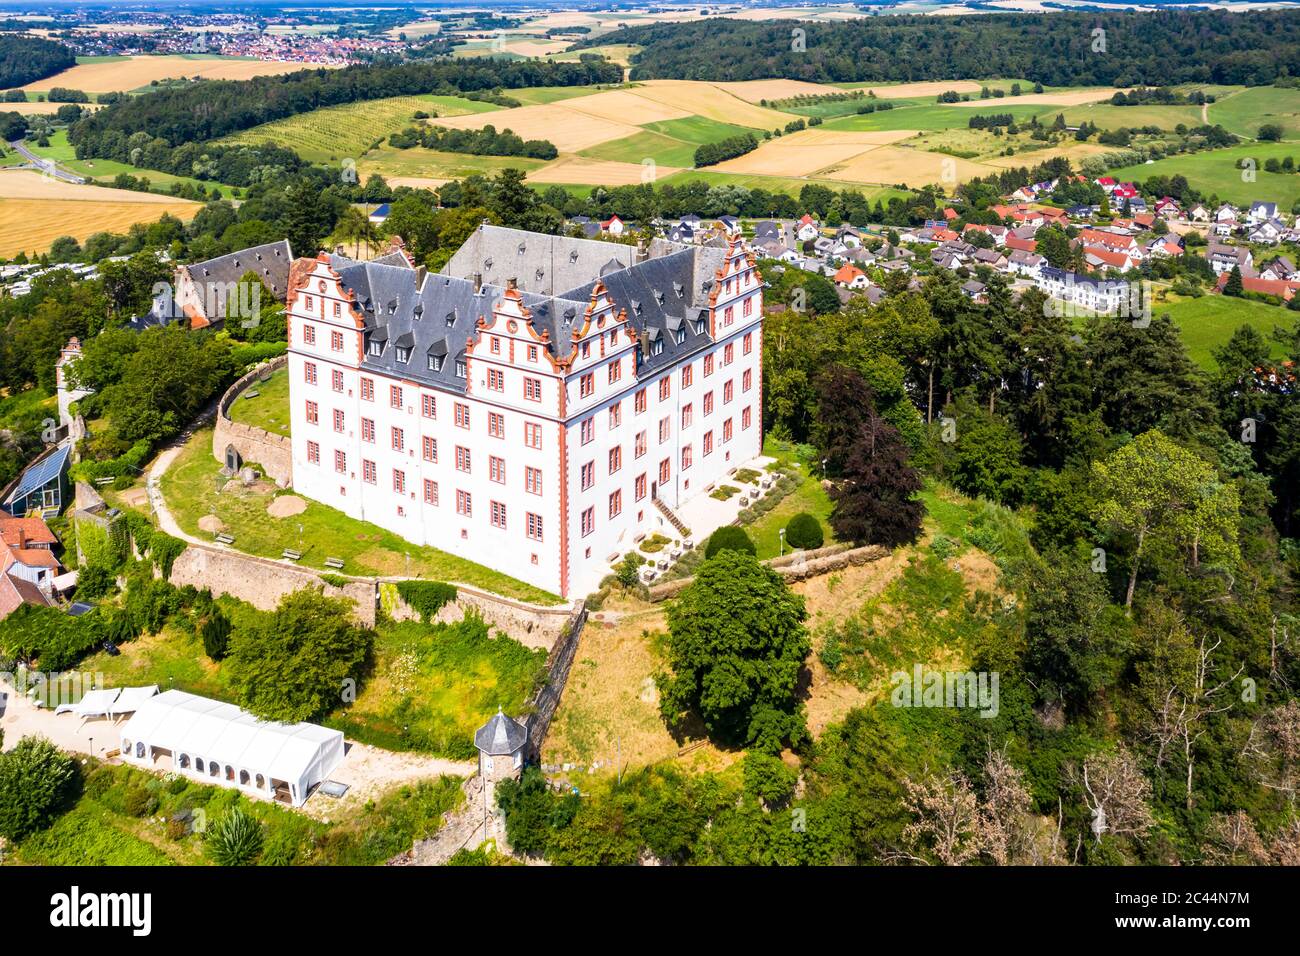 Germany, Hesse, Fischbachtal, Aerial view of Lichtenberg Castle Stock Photo